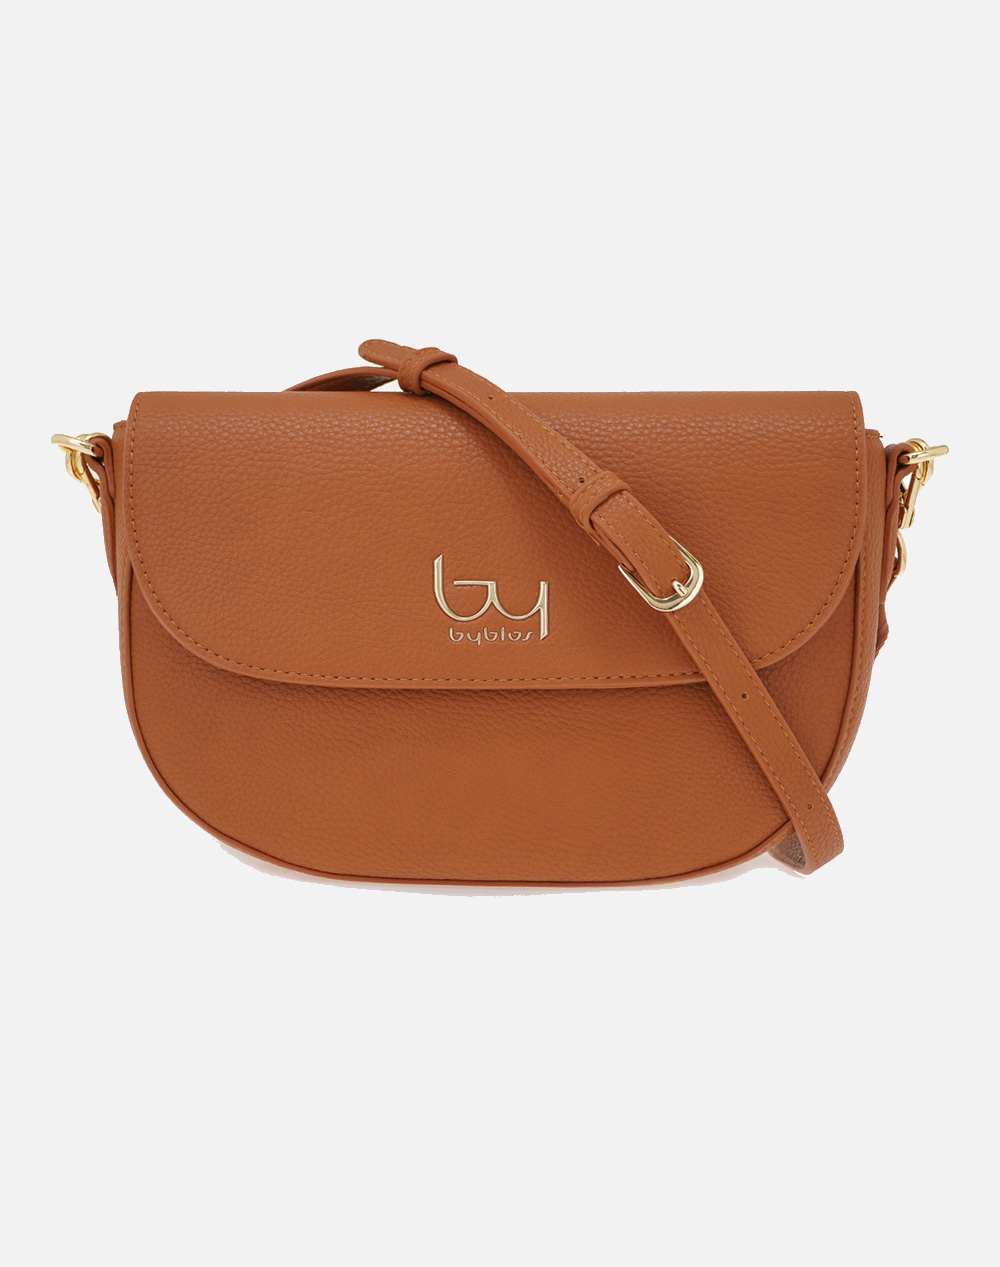 BYBLOS ΤΣΑΝΤΕΣ ΤΑΧΥΔΡΟΜΟΥ /CROSS BODY (Διαστάσεις: 27 x 18 x 7 εκ) S604S8769531-531 Tan 3810PT-BY6210005_3370